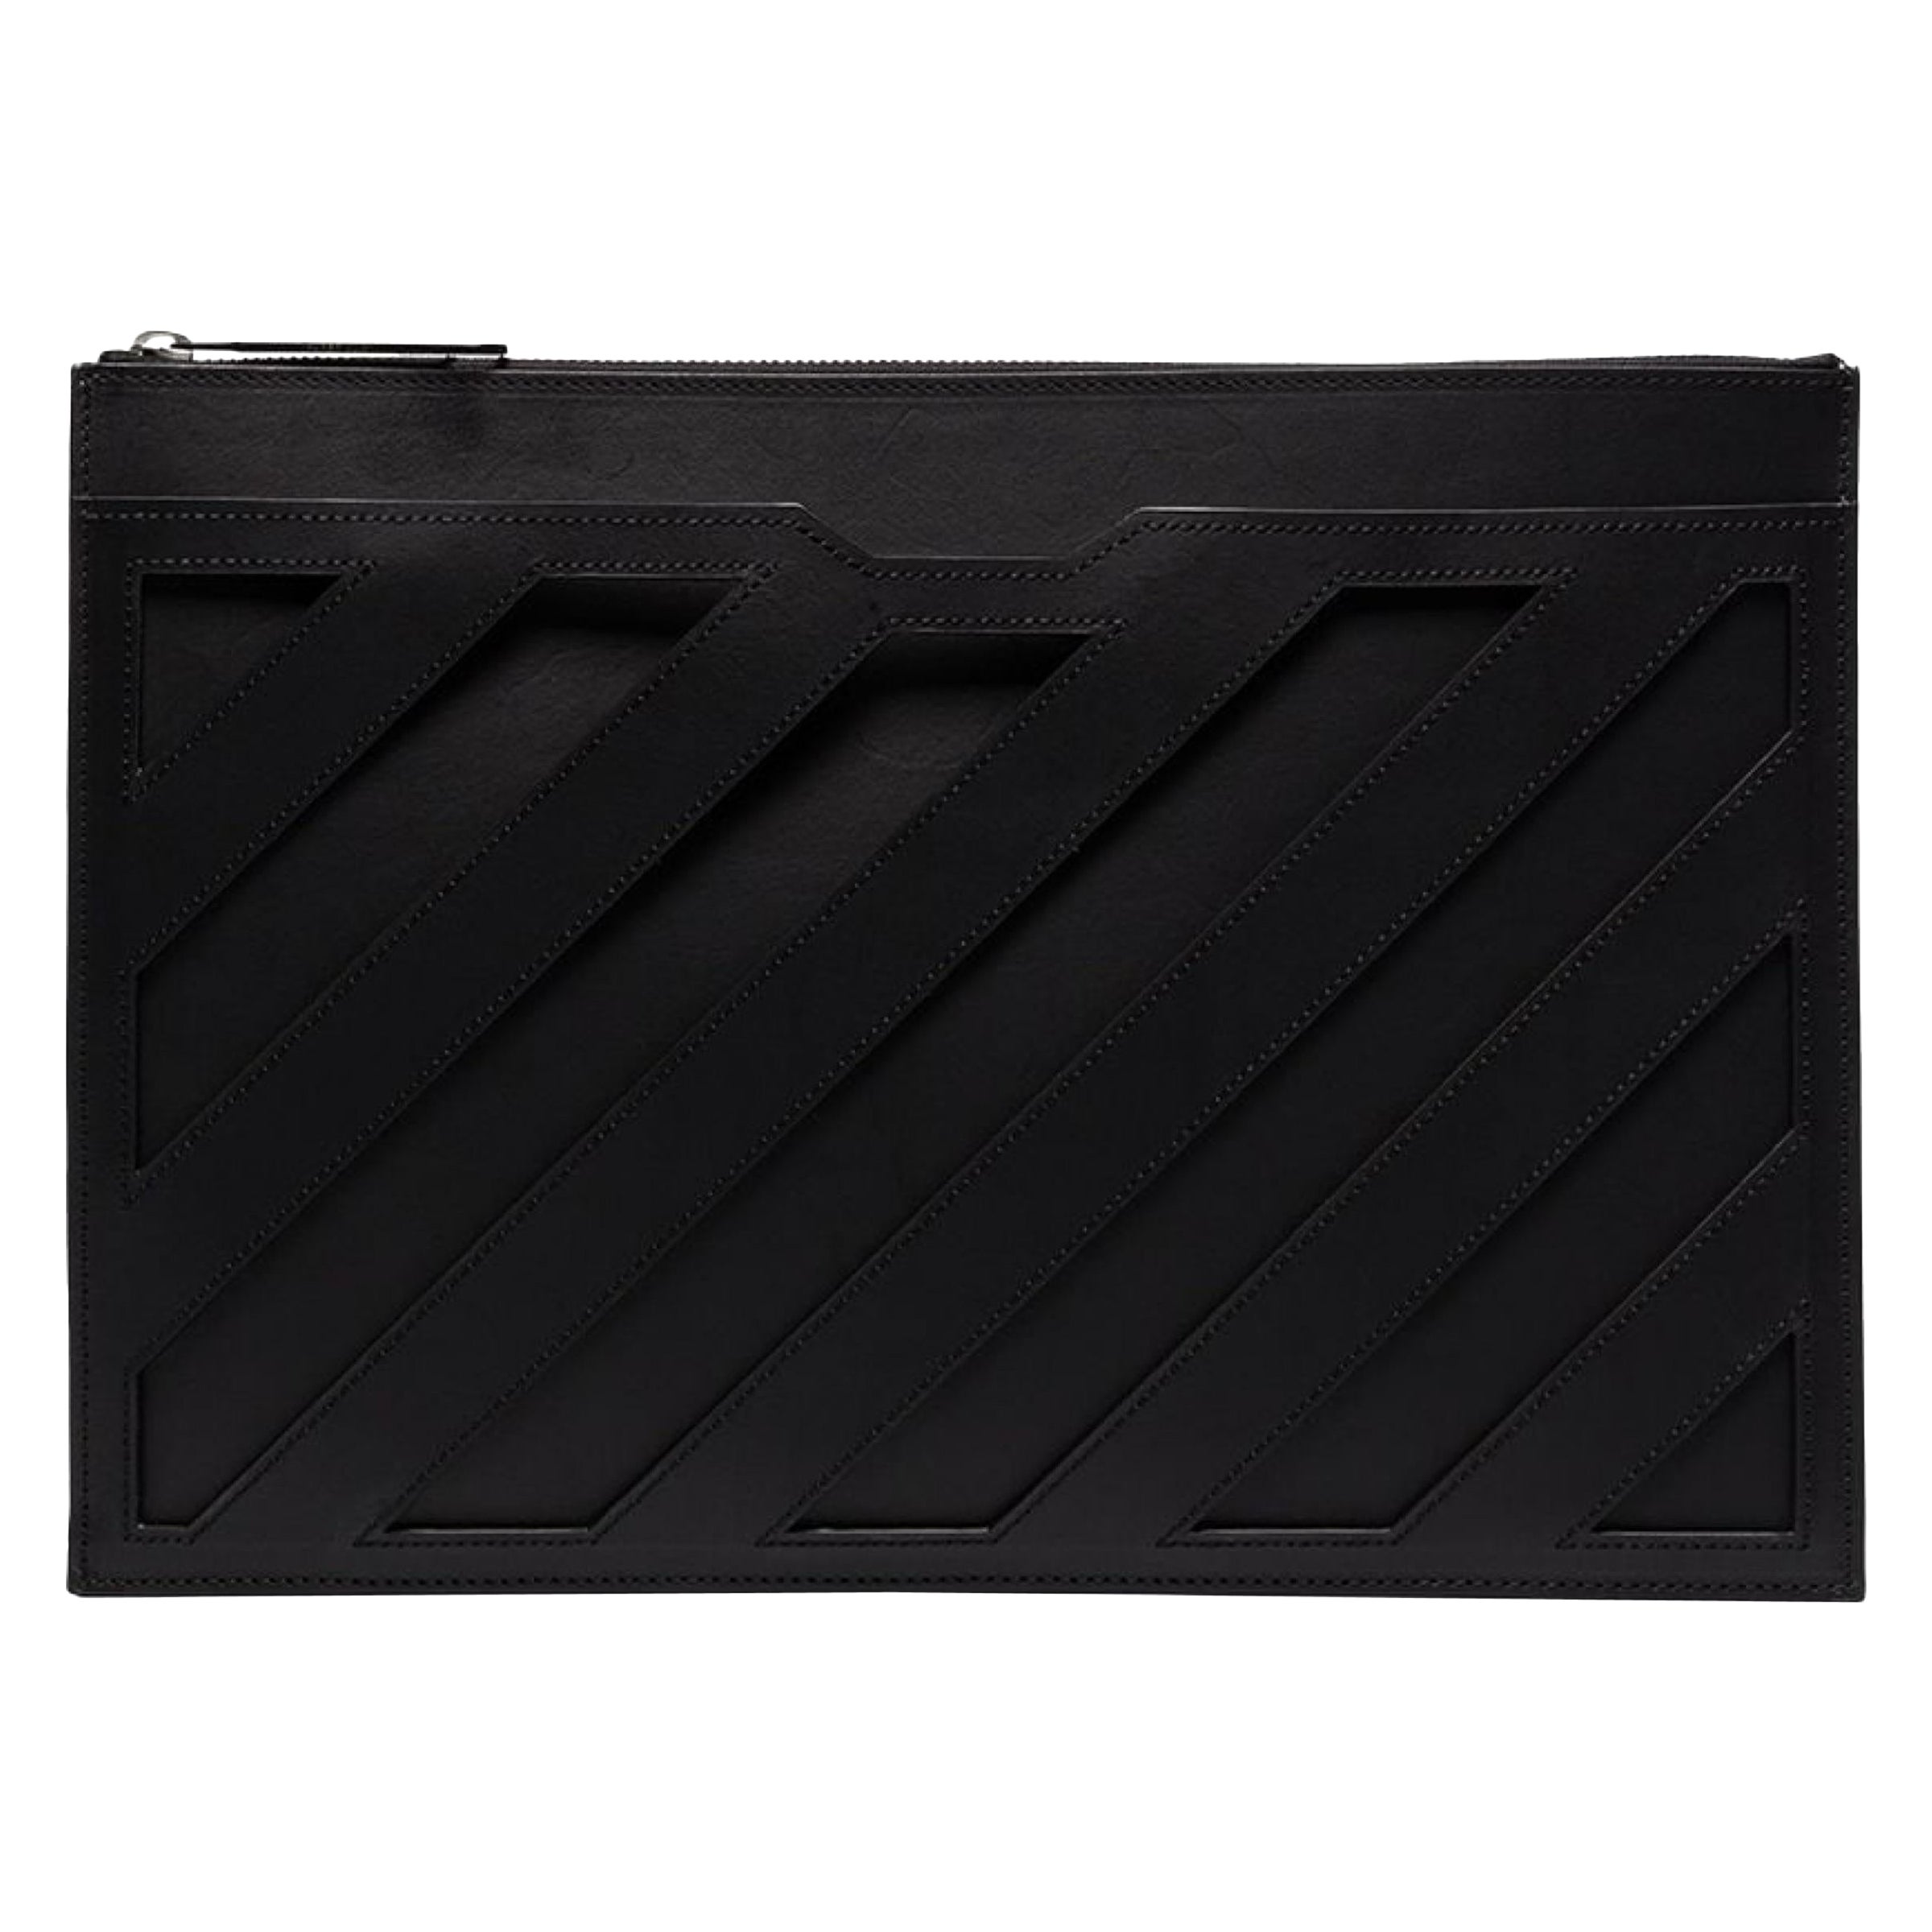 NEW Off-White Virgil Abloh Diagonal Stripes Leather Clutch Bag For Sale